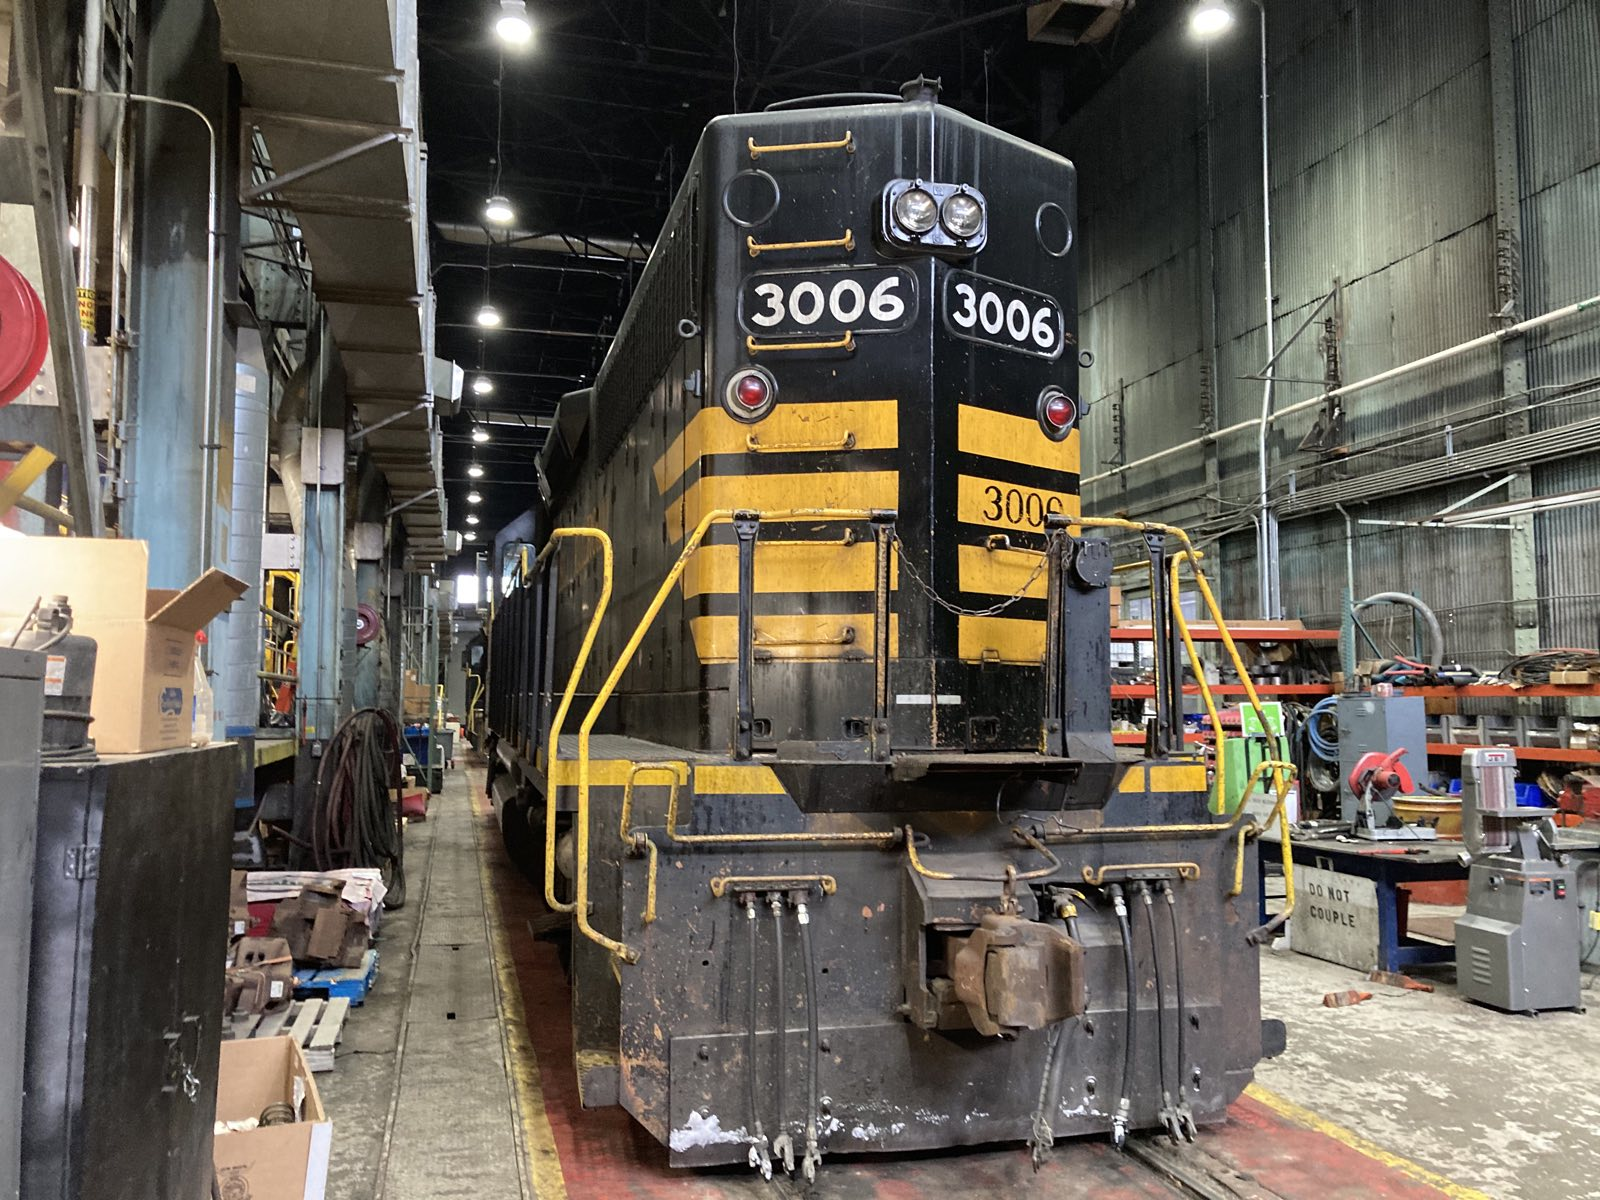 No. 3006 in the Anchorage shops